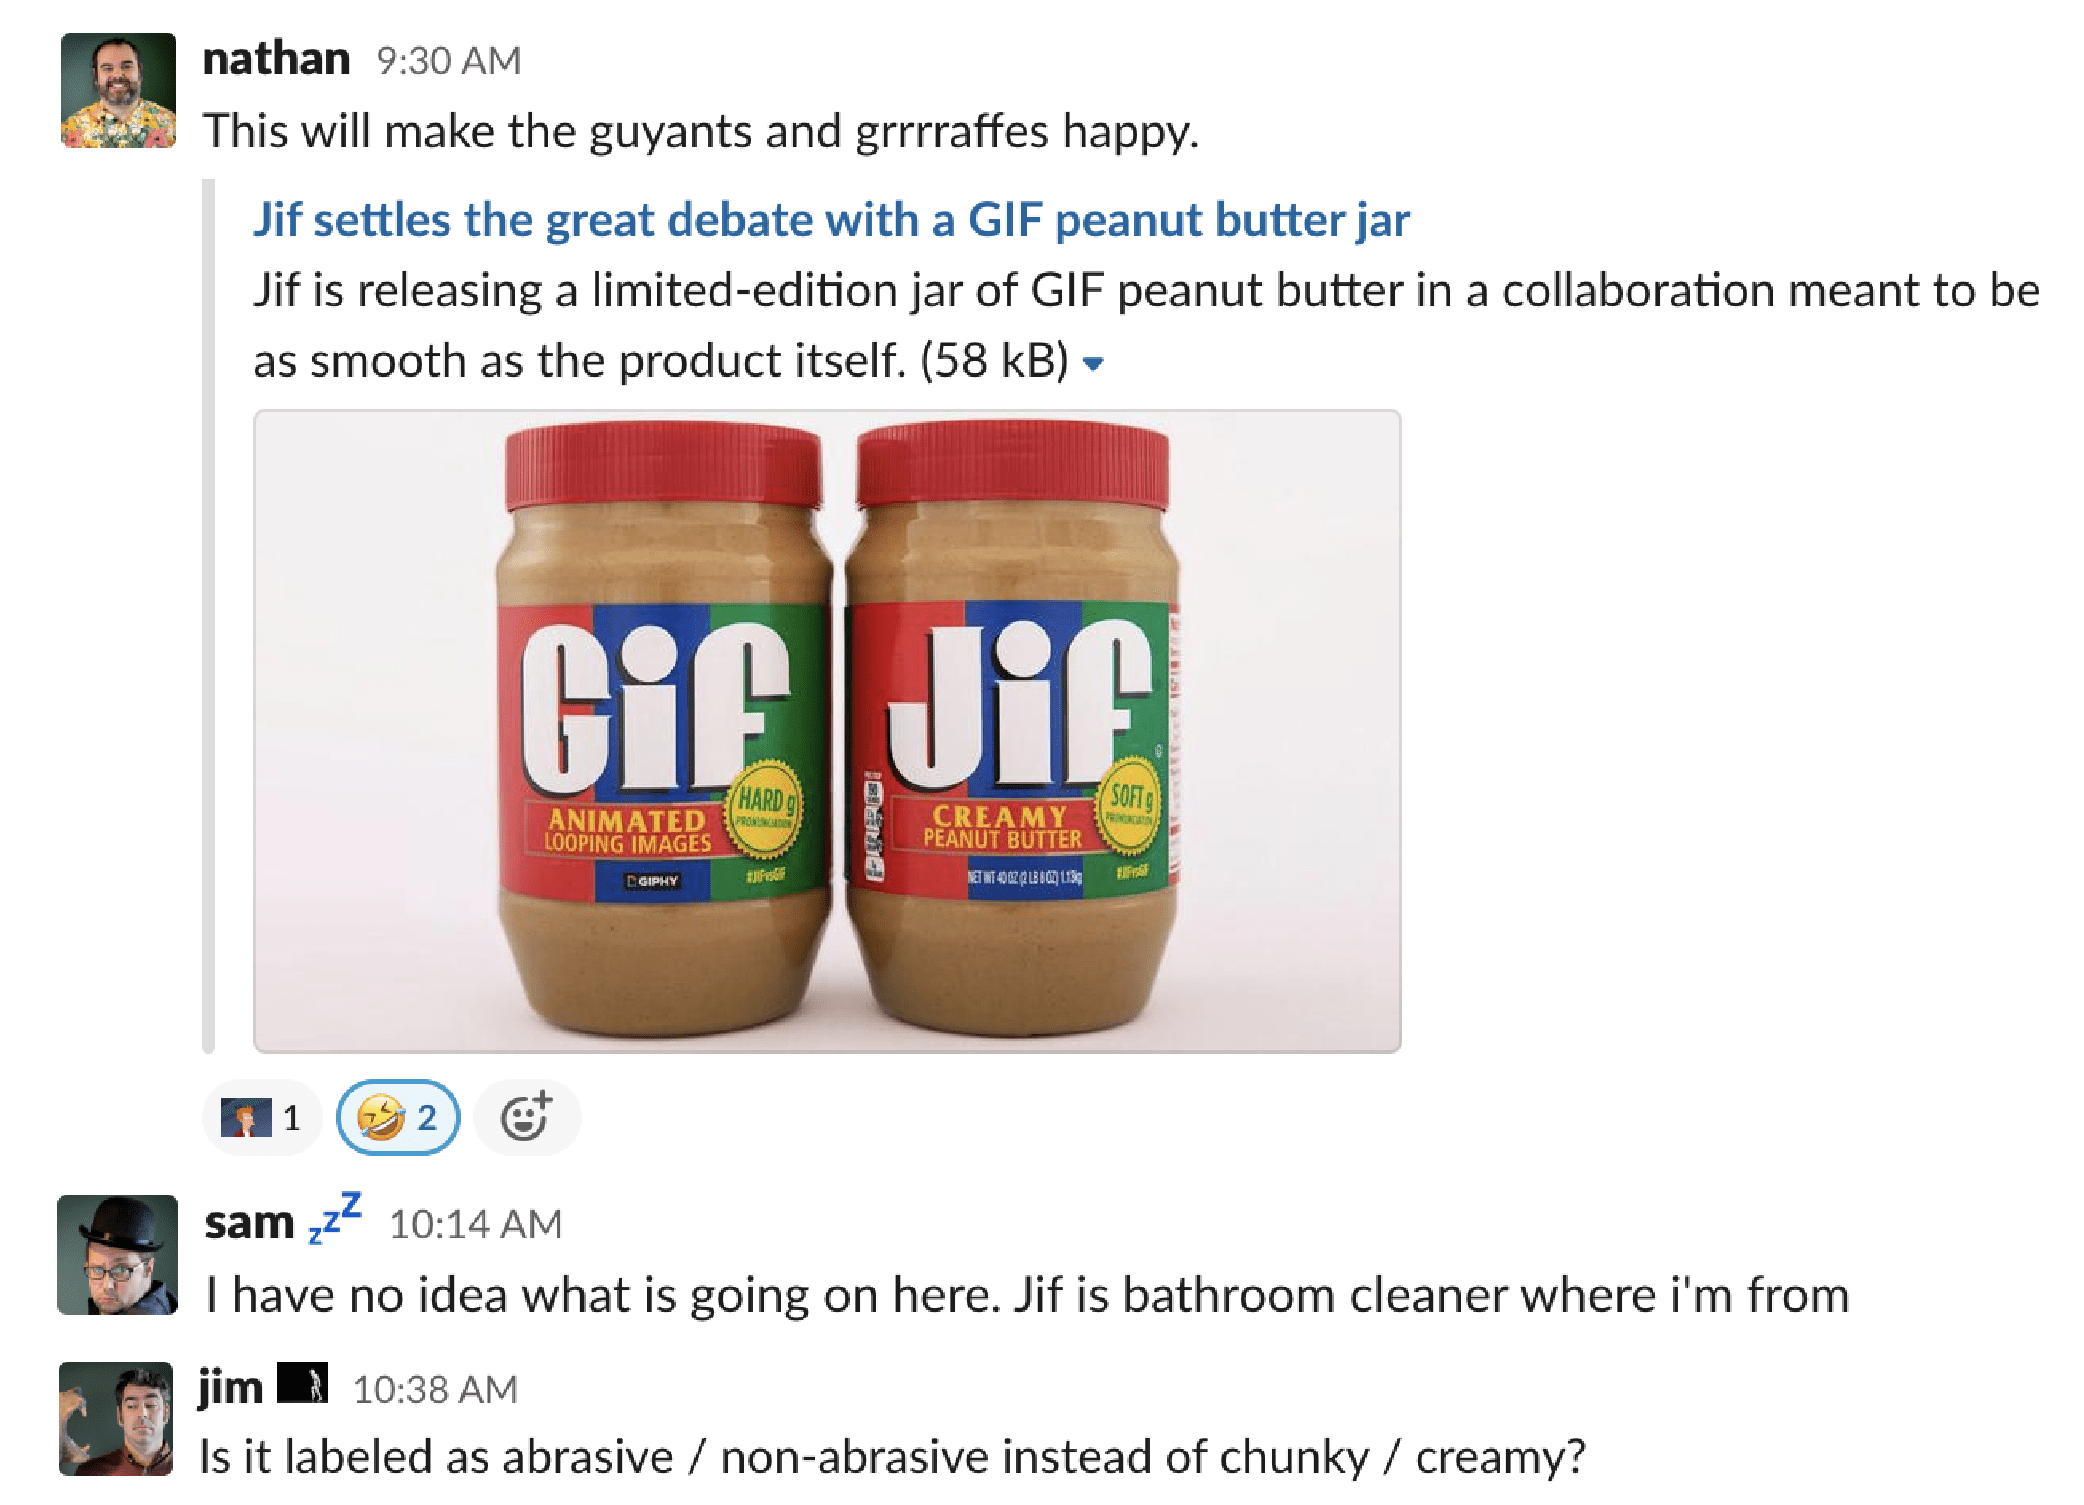 Jif settles the great debate with Gif